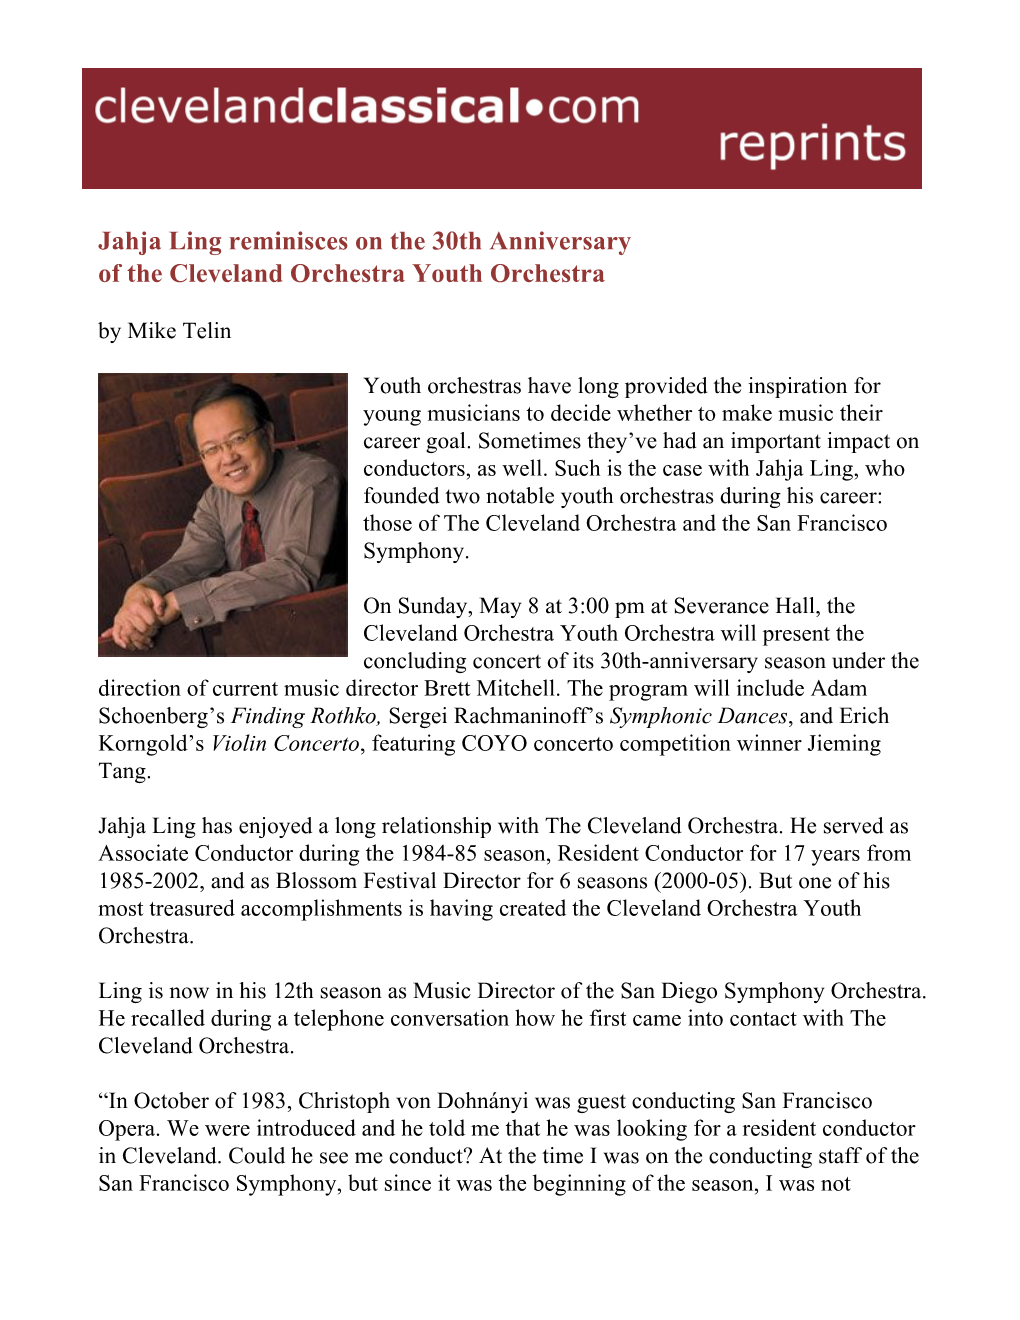 Jahja Ling Reminisces on the 30Th Anniversary of the Cleveland Orchestra Youth Orchestra by Mike Telin